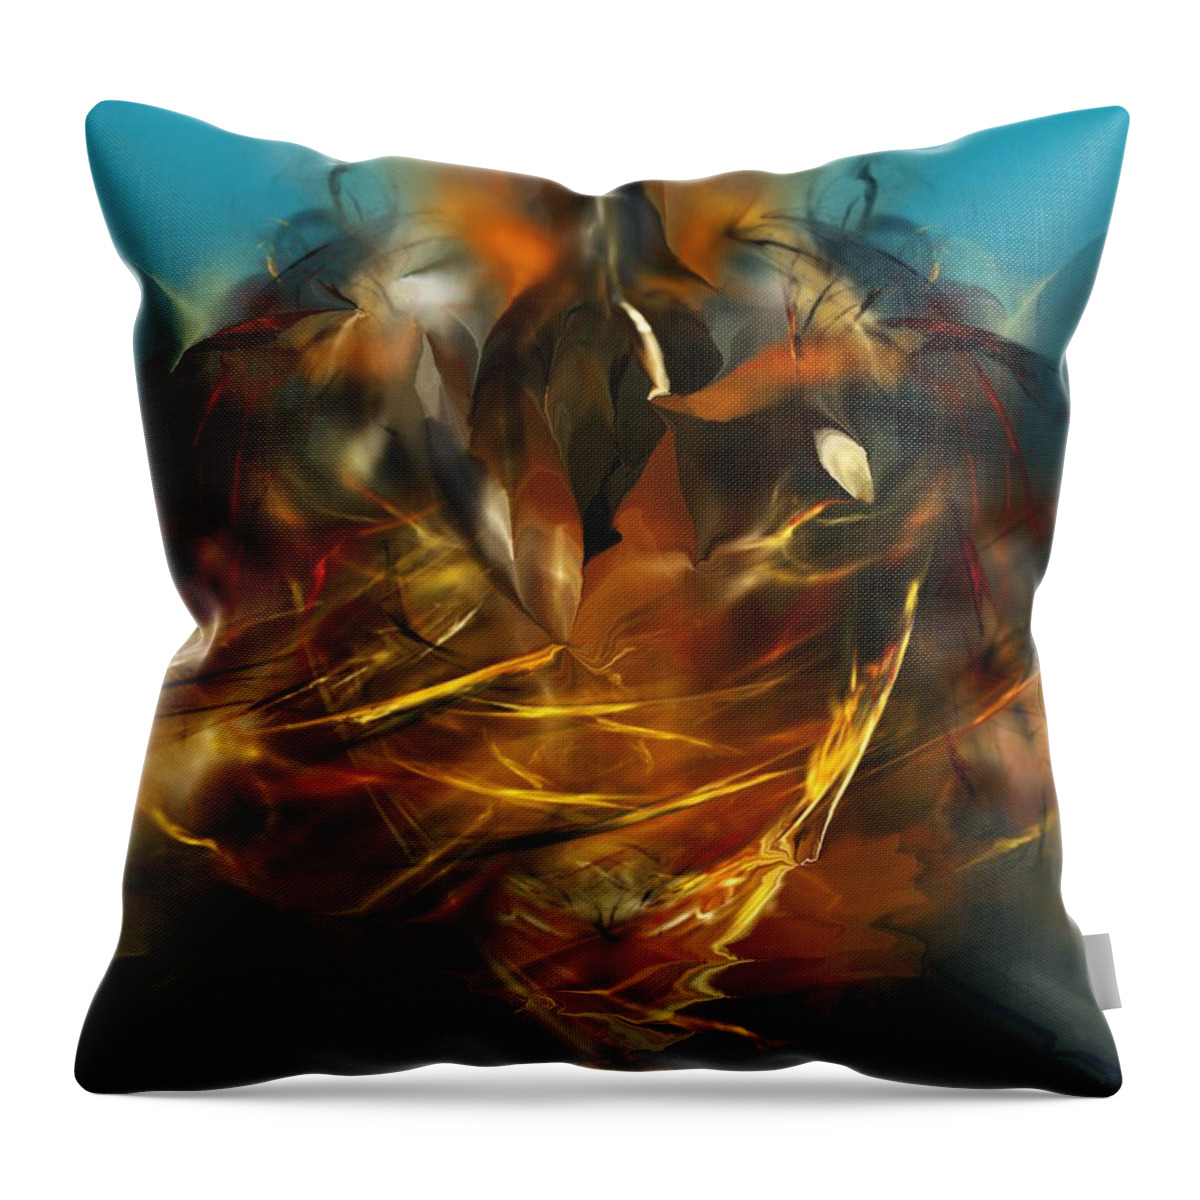 Space Throw Pillow featuring the digital art Lift Off by David Lane